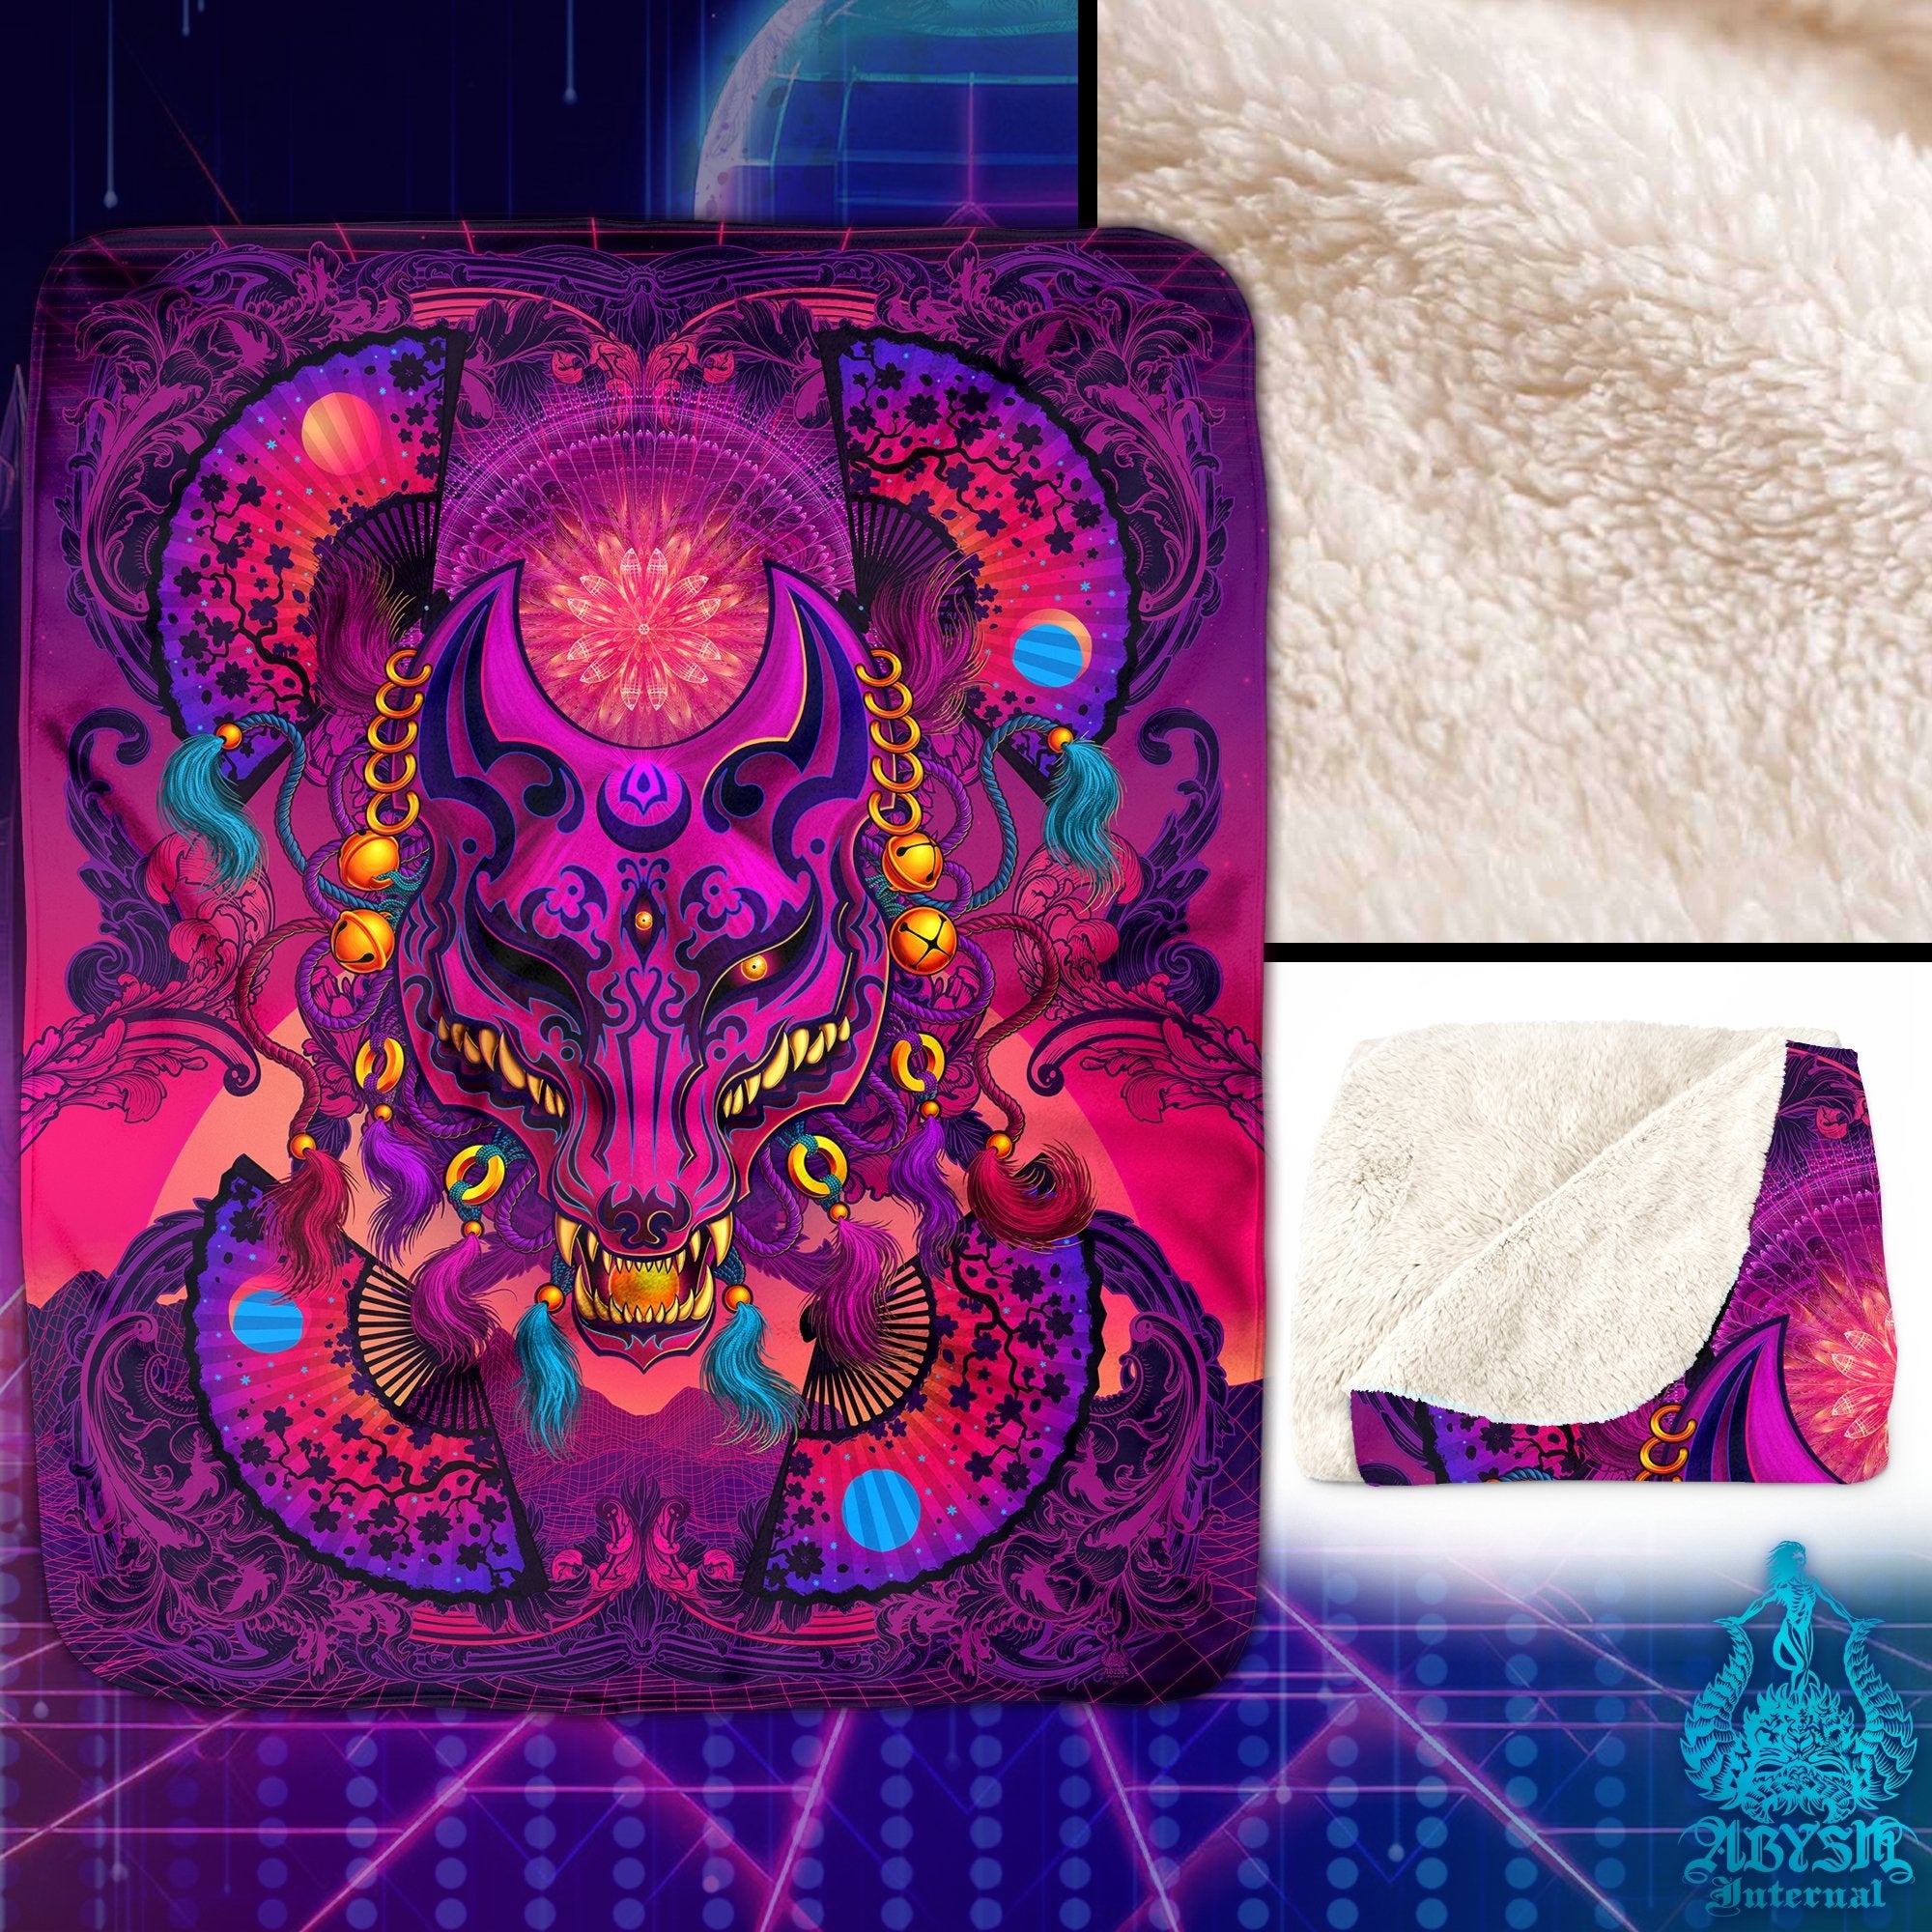 Japanese Vaporwave Throw Fleece Blanket, Synthwave Art, Psychedelic Home Decor, 80s Retrowave, Eclectic and Funky Gift for Kids, Gamers and Anime fans - Kitsune - Abysm Internal